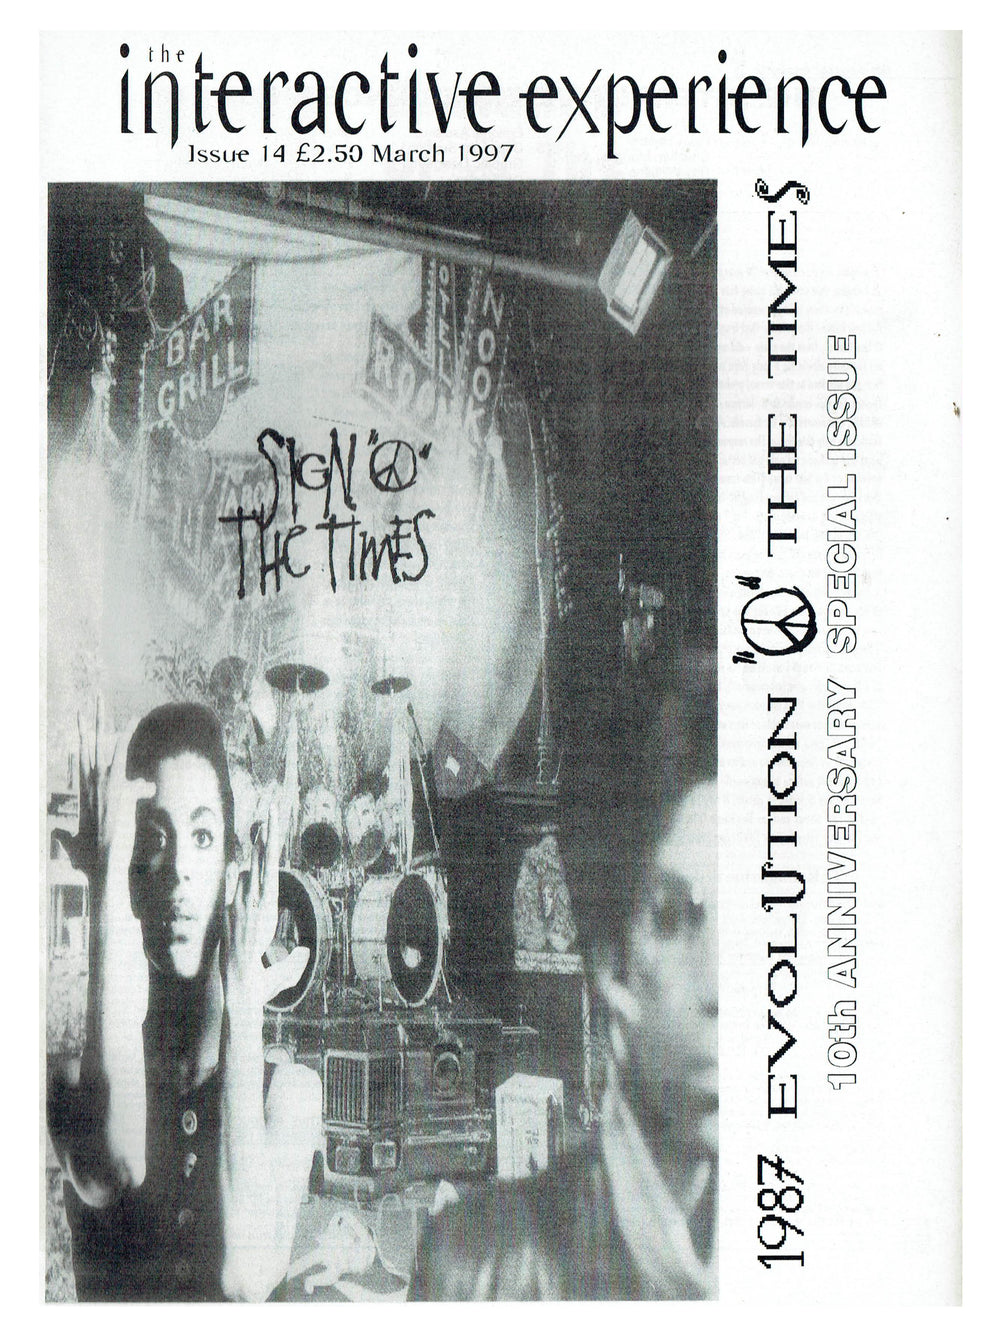 The Interactive Experience Prince Fanzine Publication Issue 14 March 1997